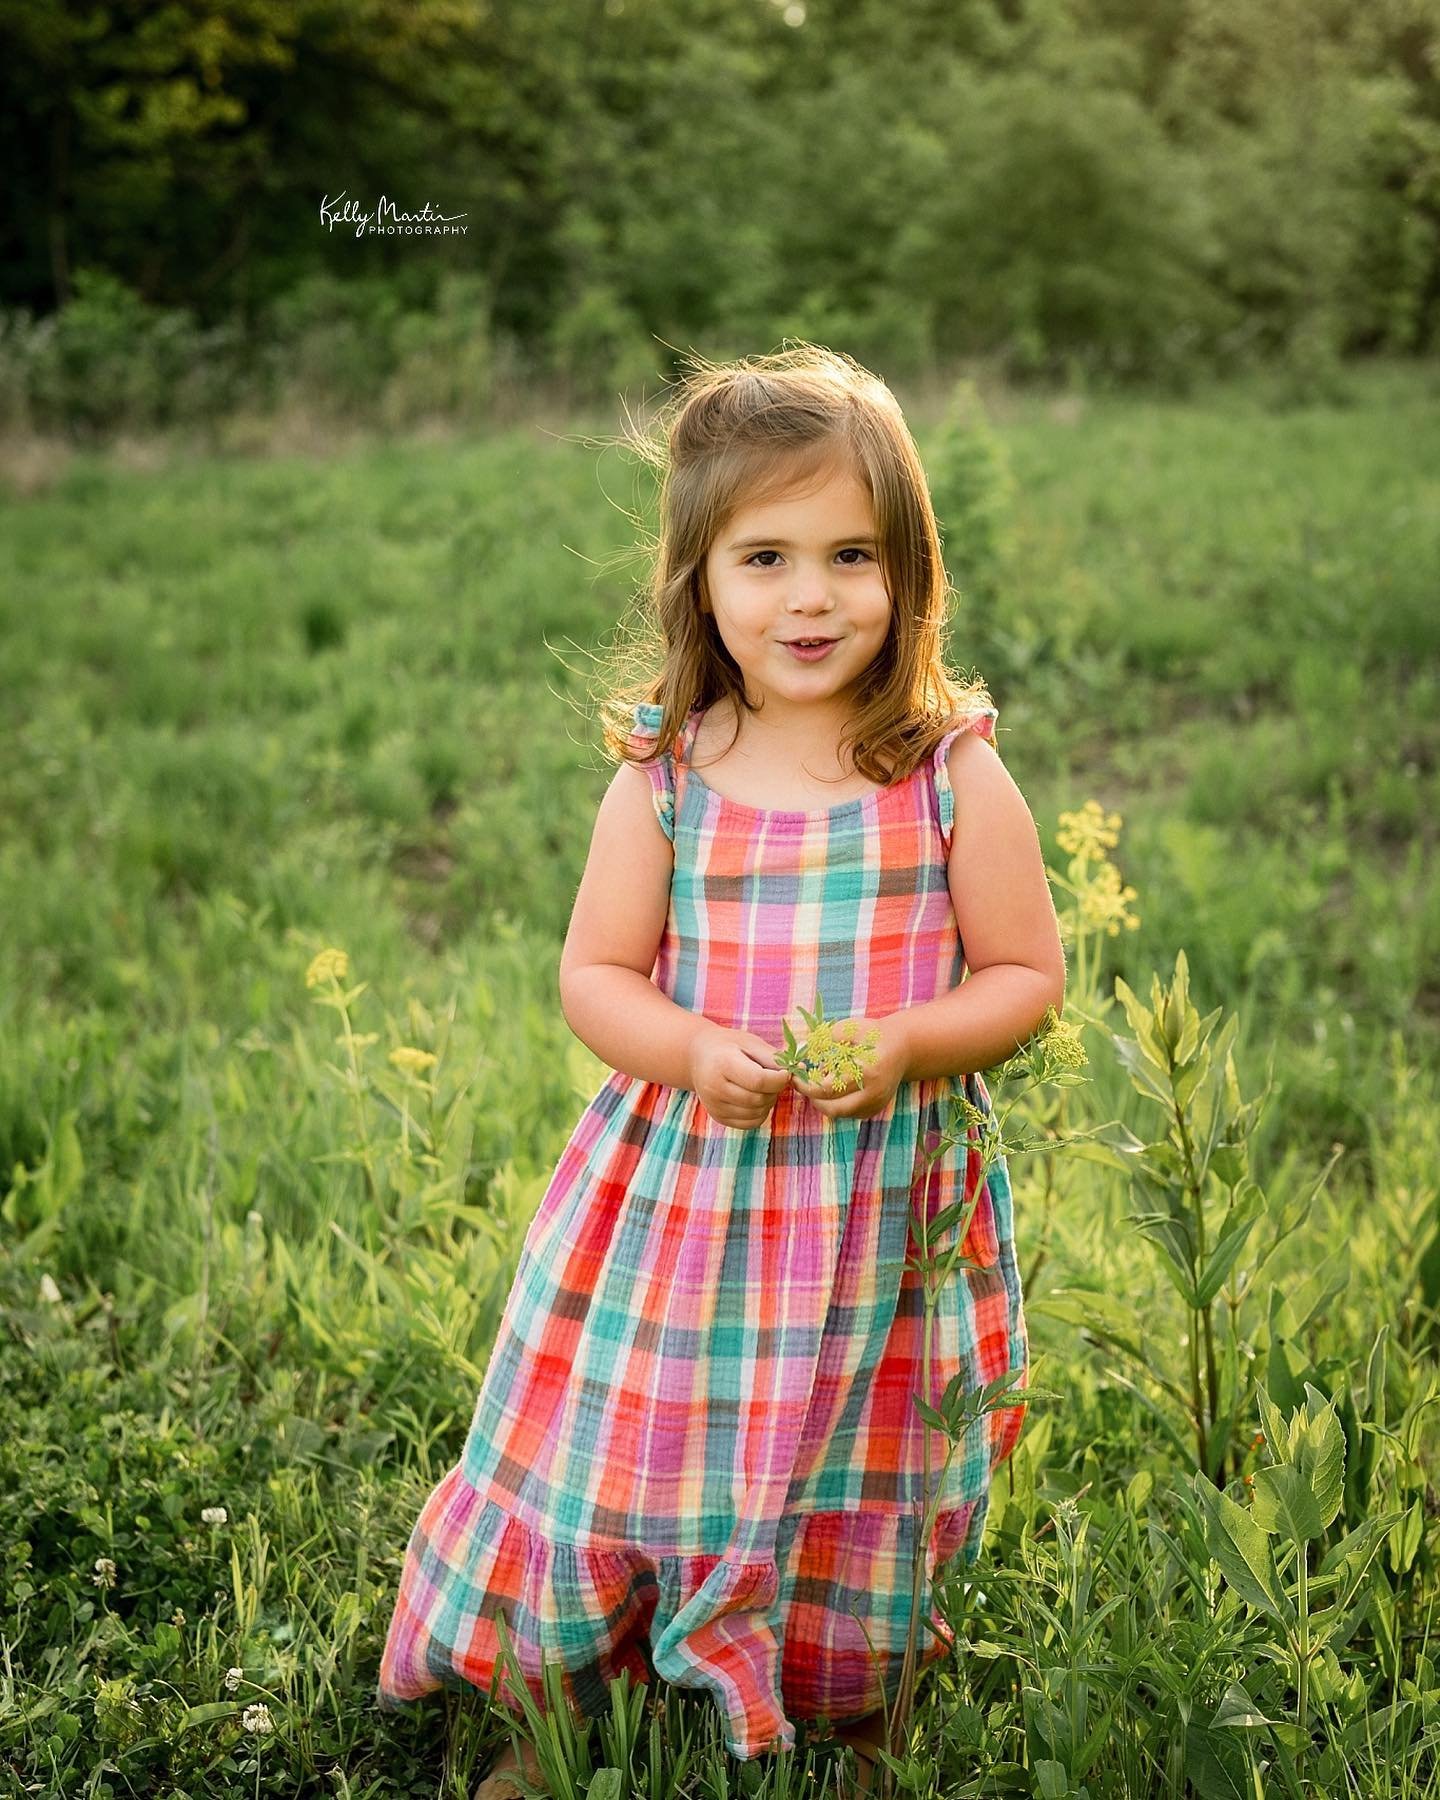 I love that we have shot Andi&rsquo;s birthday photos in the same location each year - growing girl in the beautiful light #kellymartinphotography #indianapolisfamilyphotographer #zionsvillefamilyphotographer